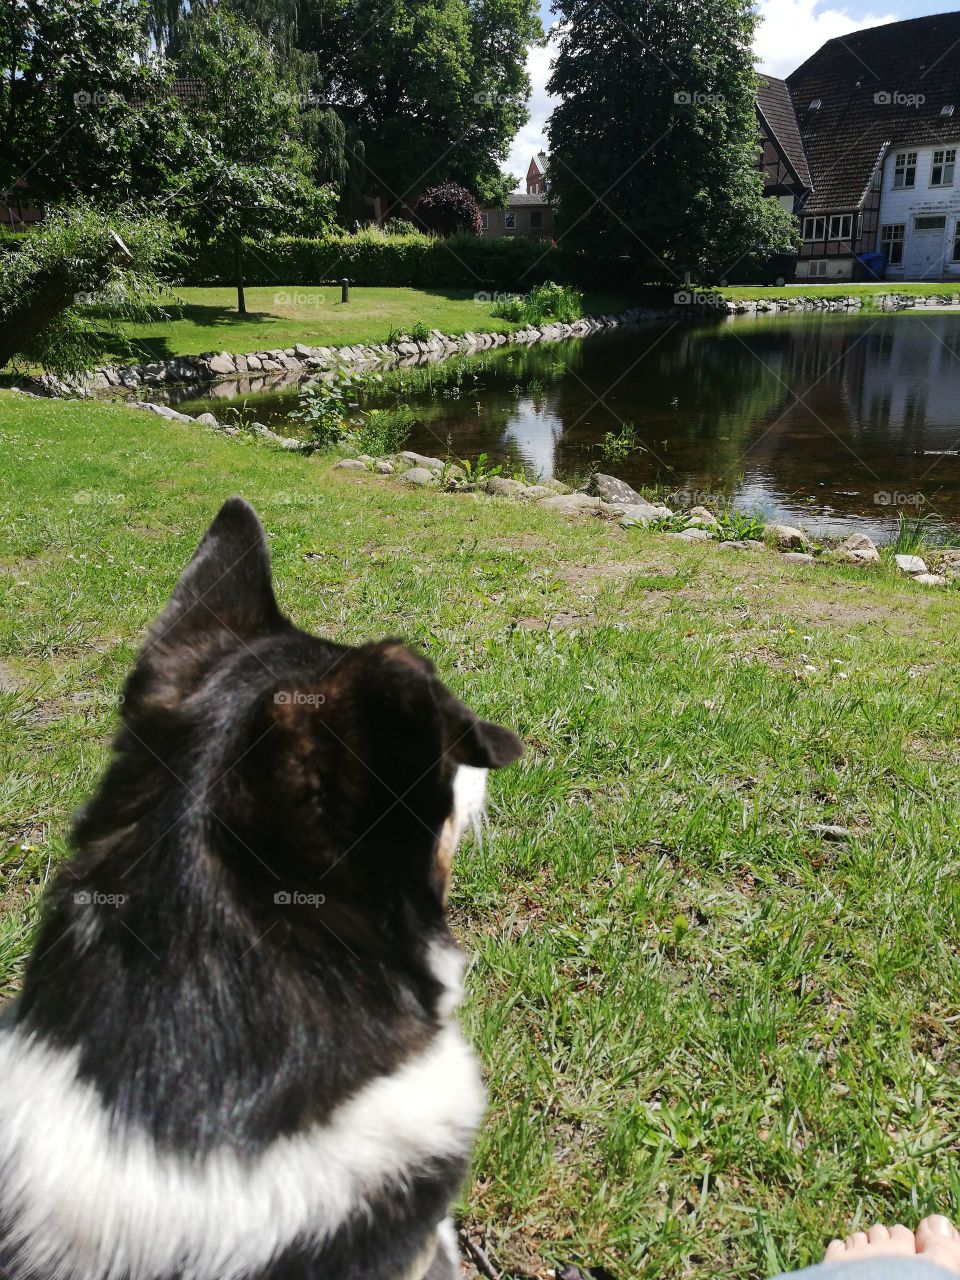 Small dog overlooking a lake with green grass and houses in the background